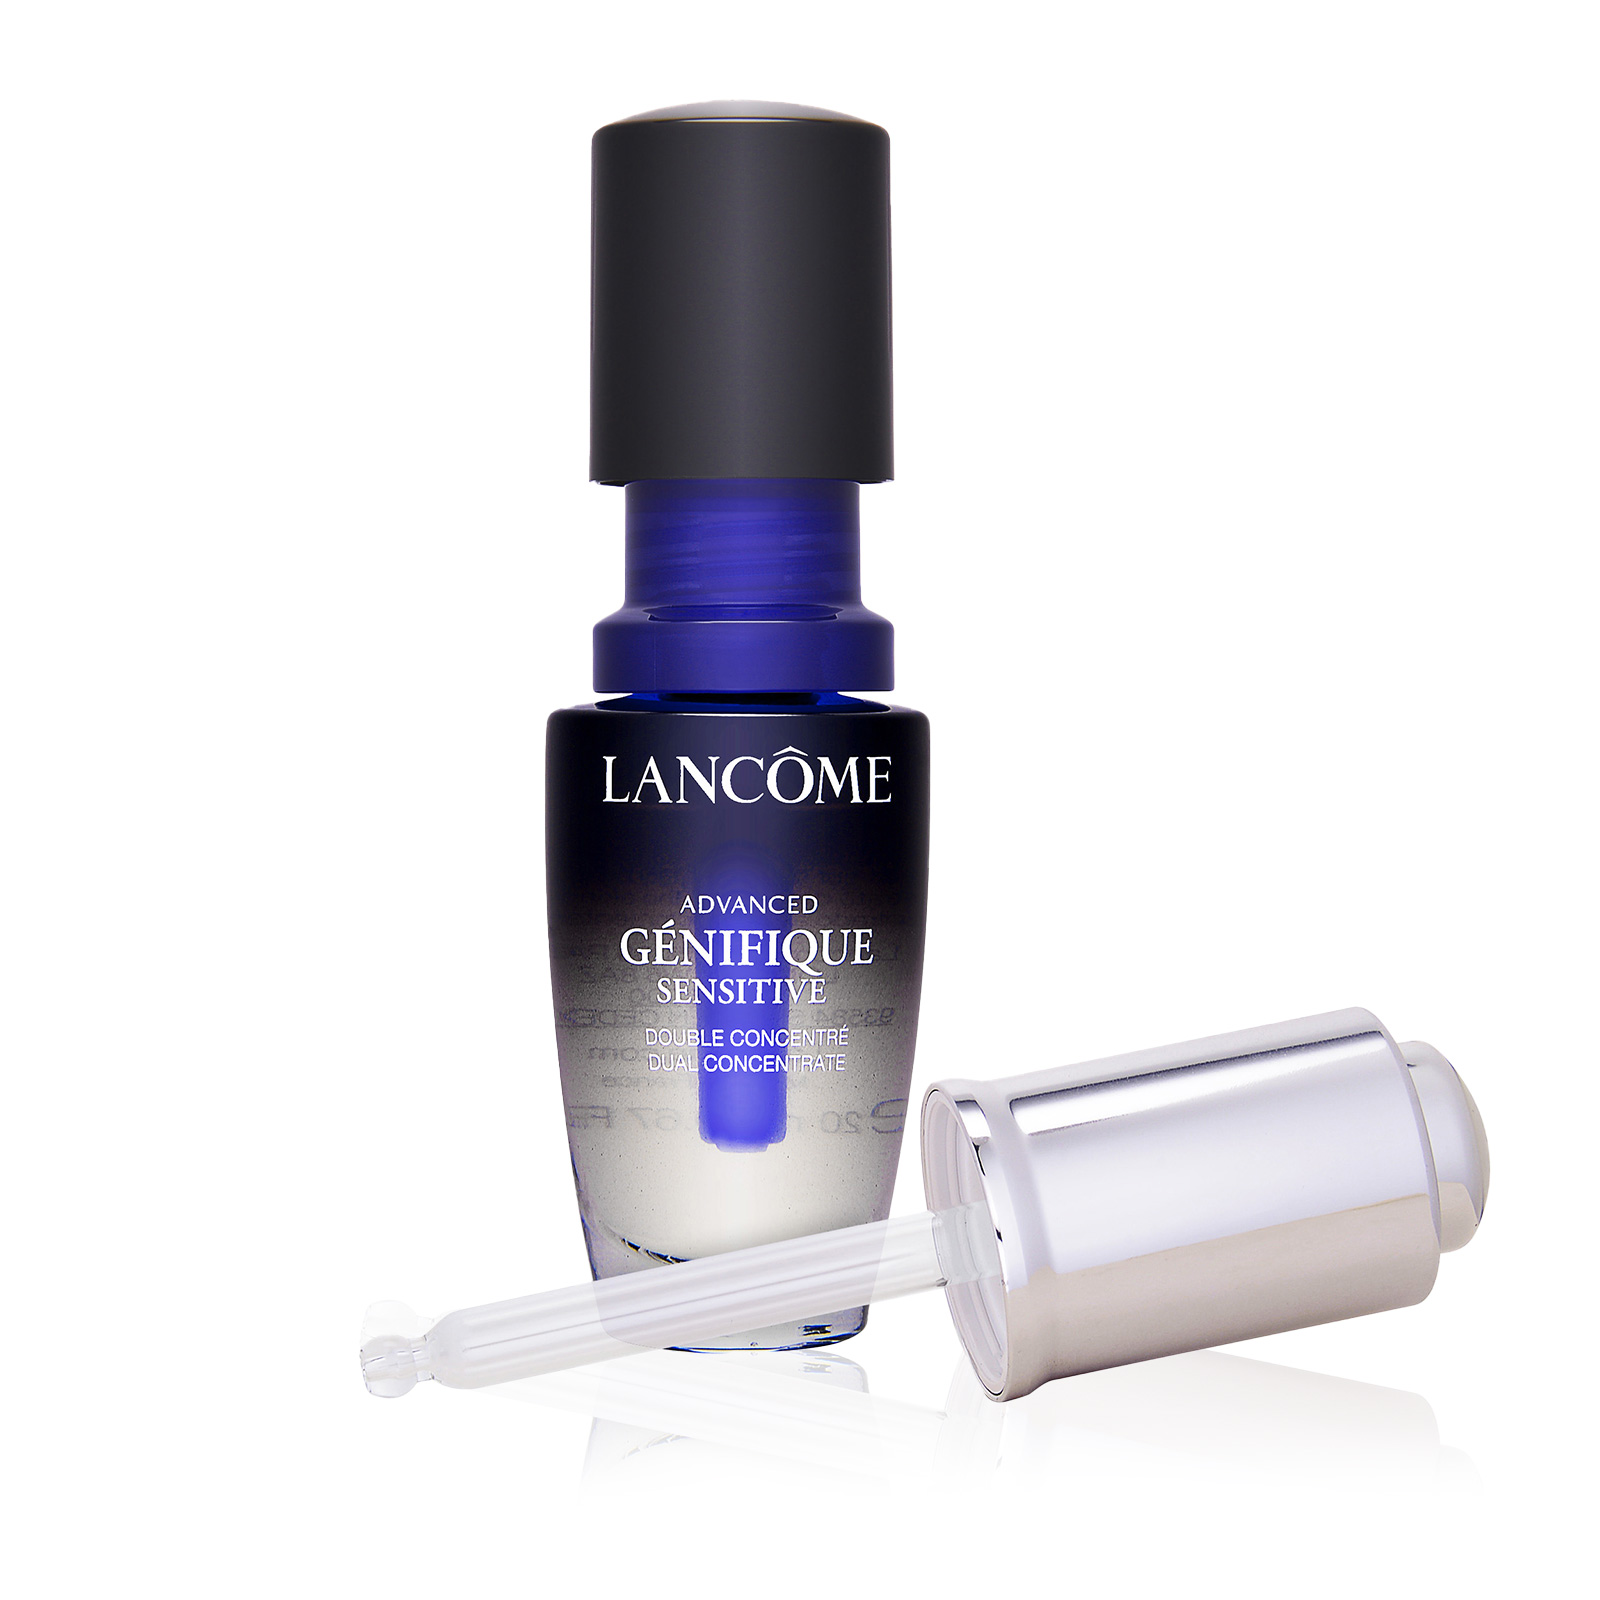 Advanced Genifique Sensitive Intense Recovery & Soothing Dual Concentrate